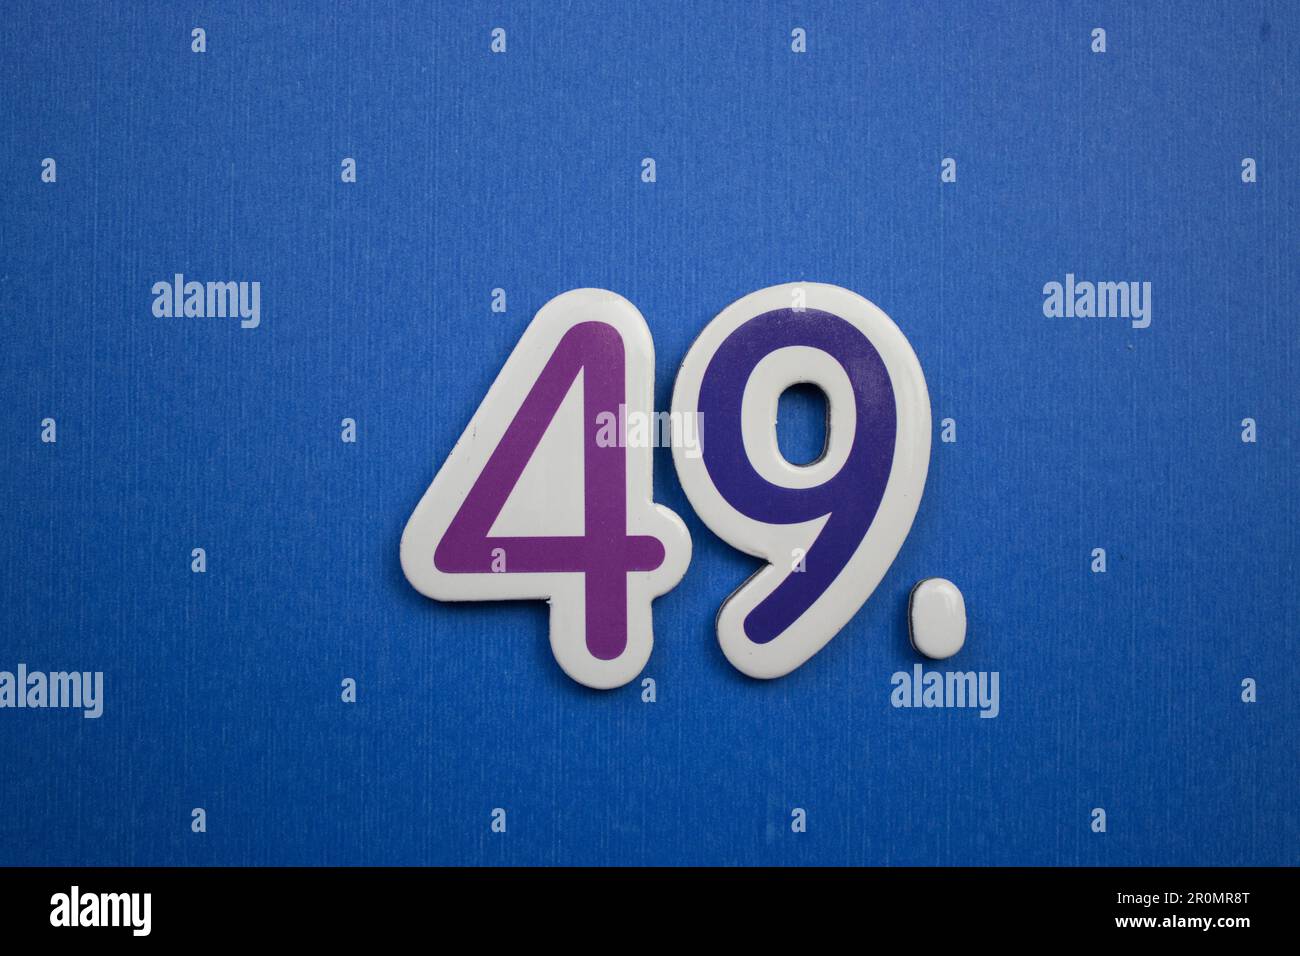 The number 49, placed on a blue background, photographed from above, colored purple and dark blue. Stock Photo